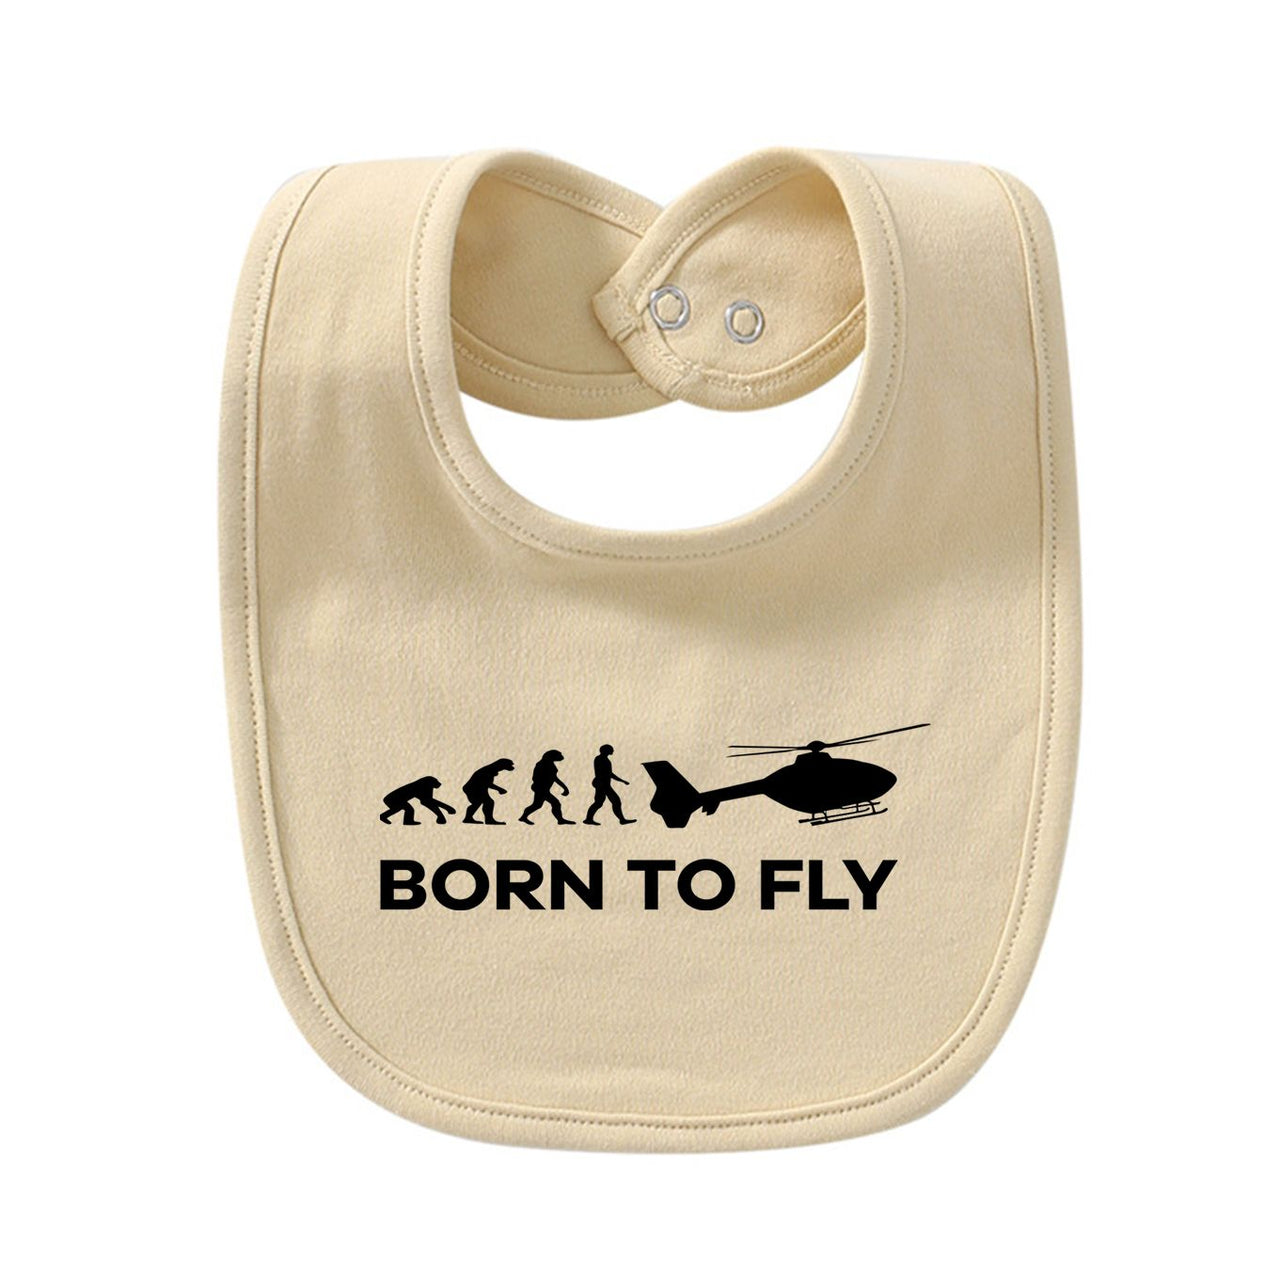 Born To Fly Helicopter Designed Baby Saliva & Feeding Towels